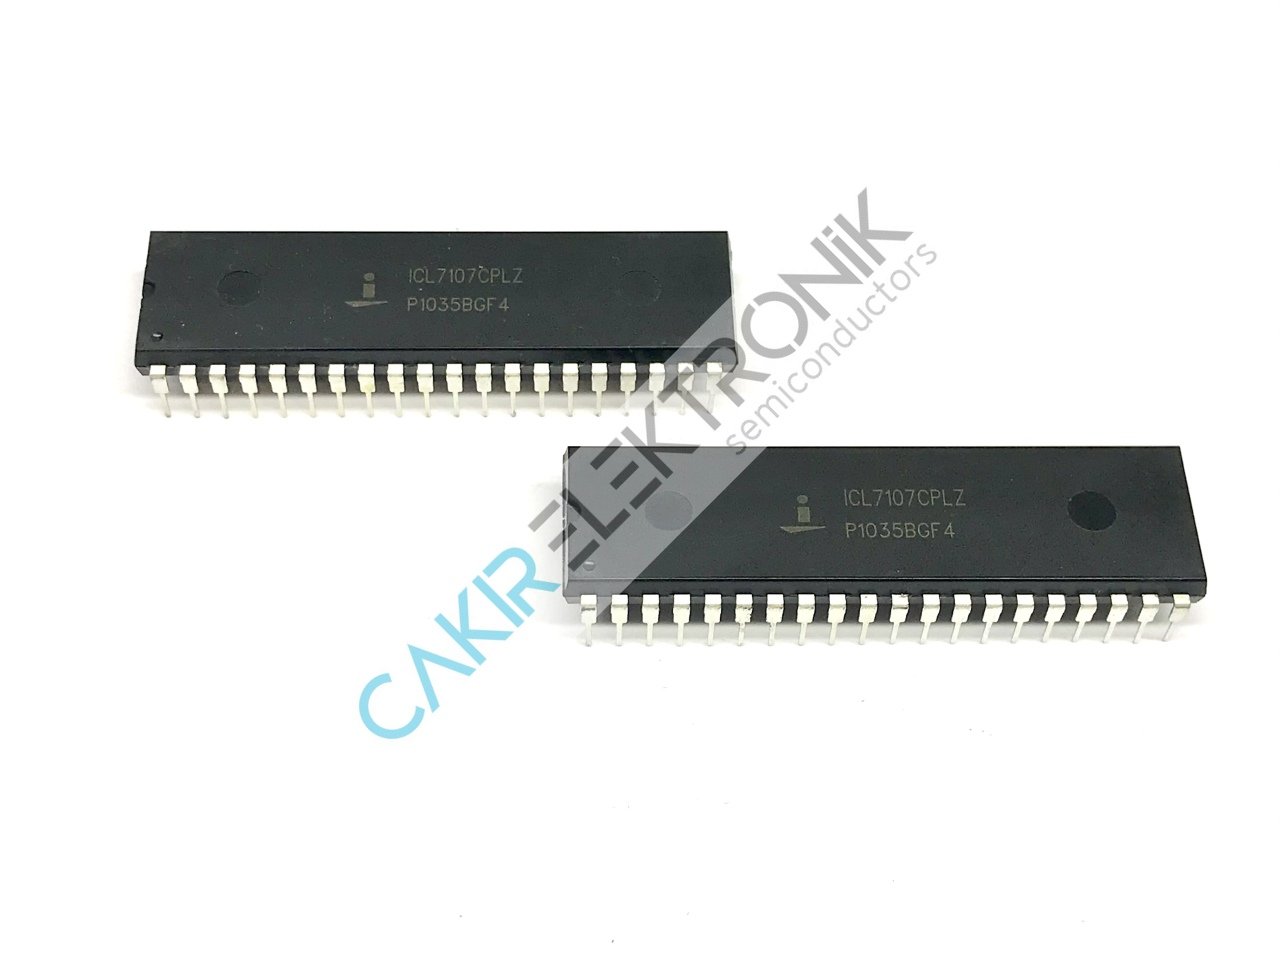 ICL7107CPLZ - ICL7107 - 7107 - 31/2 Digit, LCD/LED Display, A/D Converters